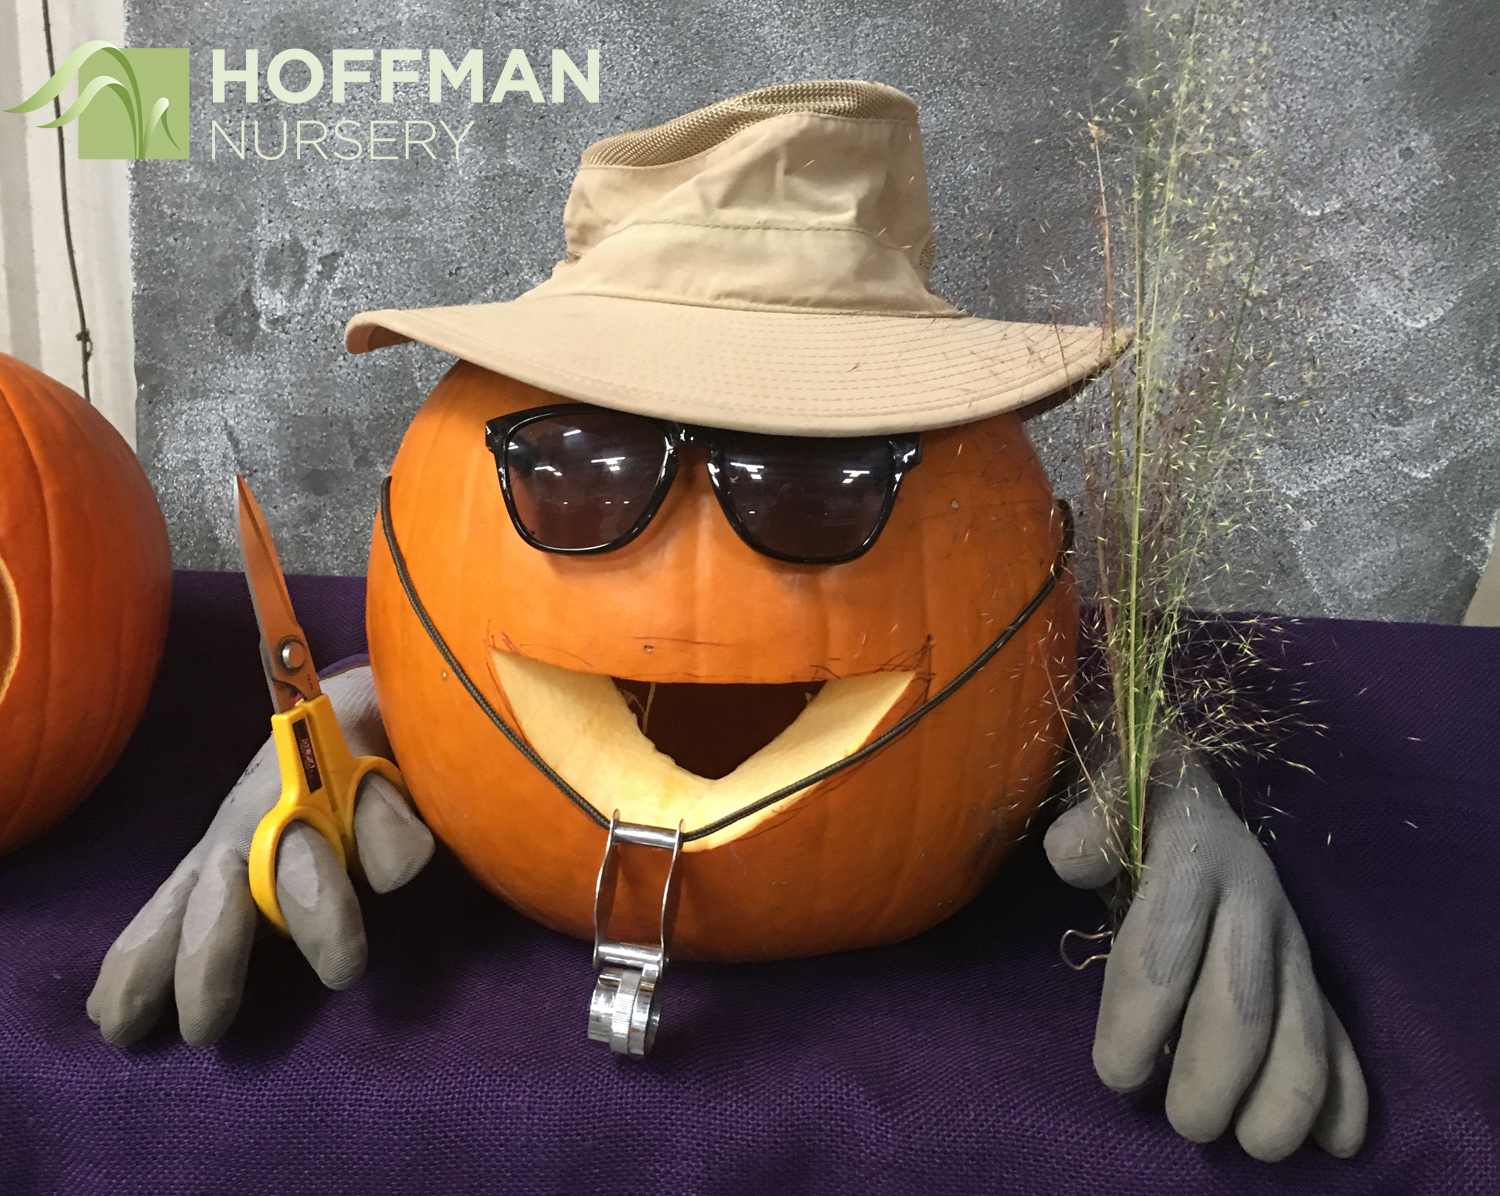 Our growers take the scary out of working with Hoffman Nursery. You know you're getting great grasses!